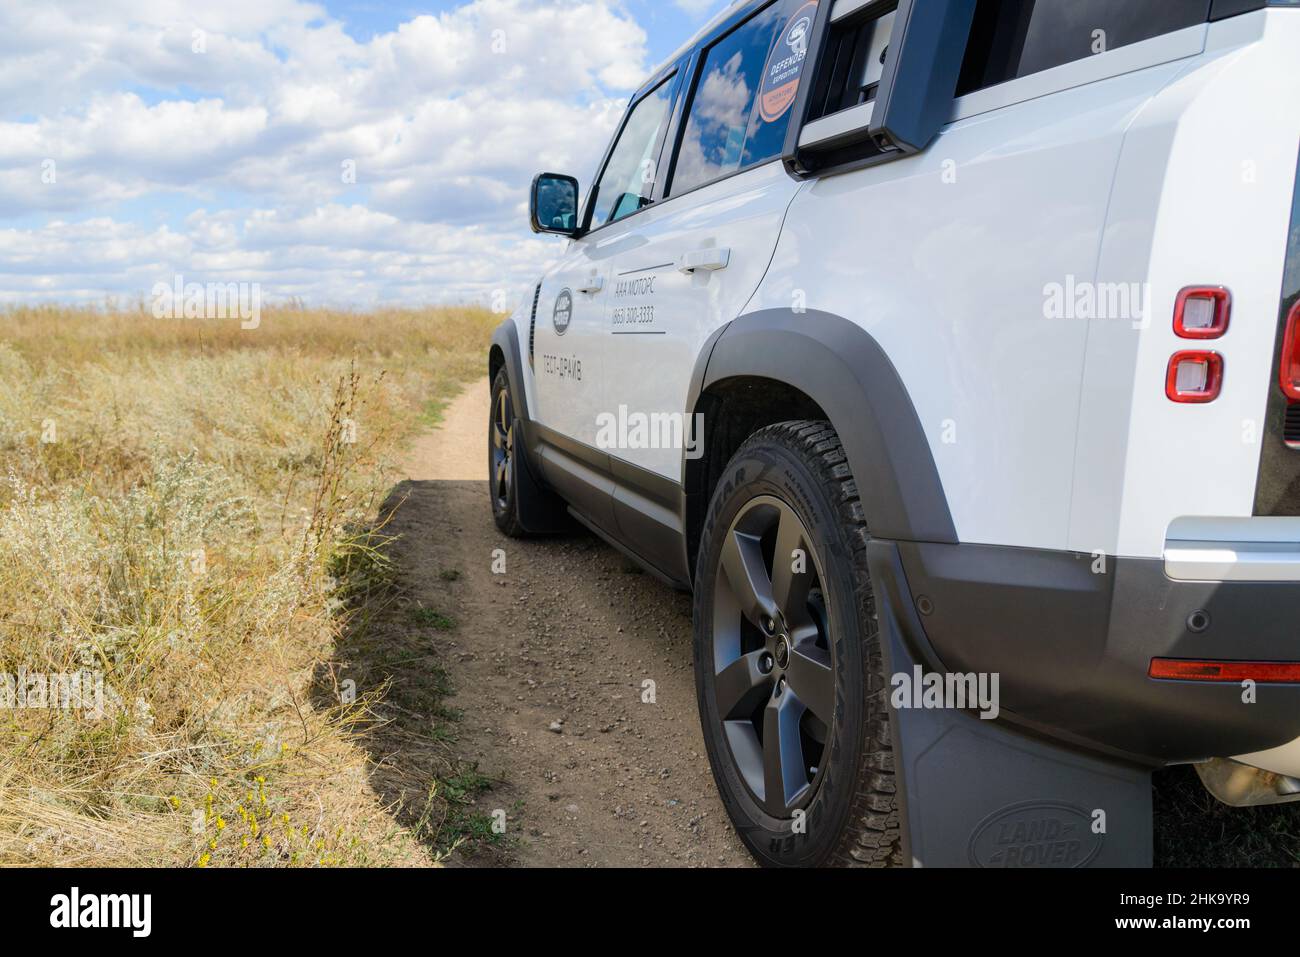 Russia, Rostovskaya oblast, 2021 June 09: Modern new SUV car Land Rover Defender, test drive on dirty road. Offroad 4x4 driving in wild. Stock Photo